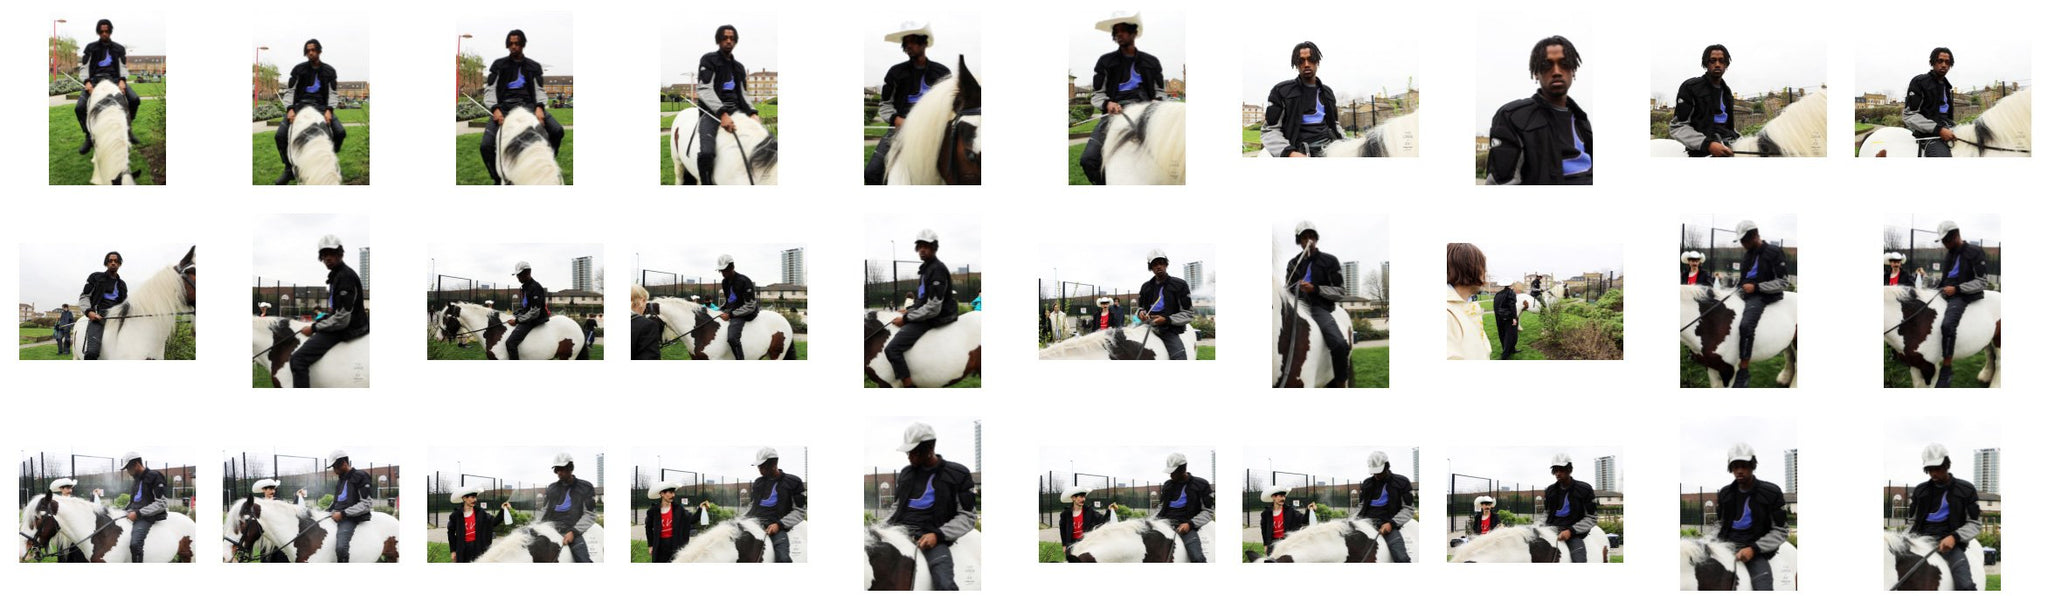 Jahsiri on Draft Horse, Part 2 (in collab. with The Lover, London) - Riding.Vision